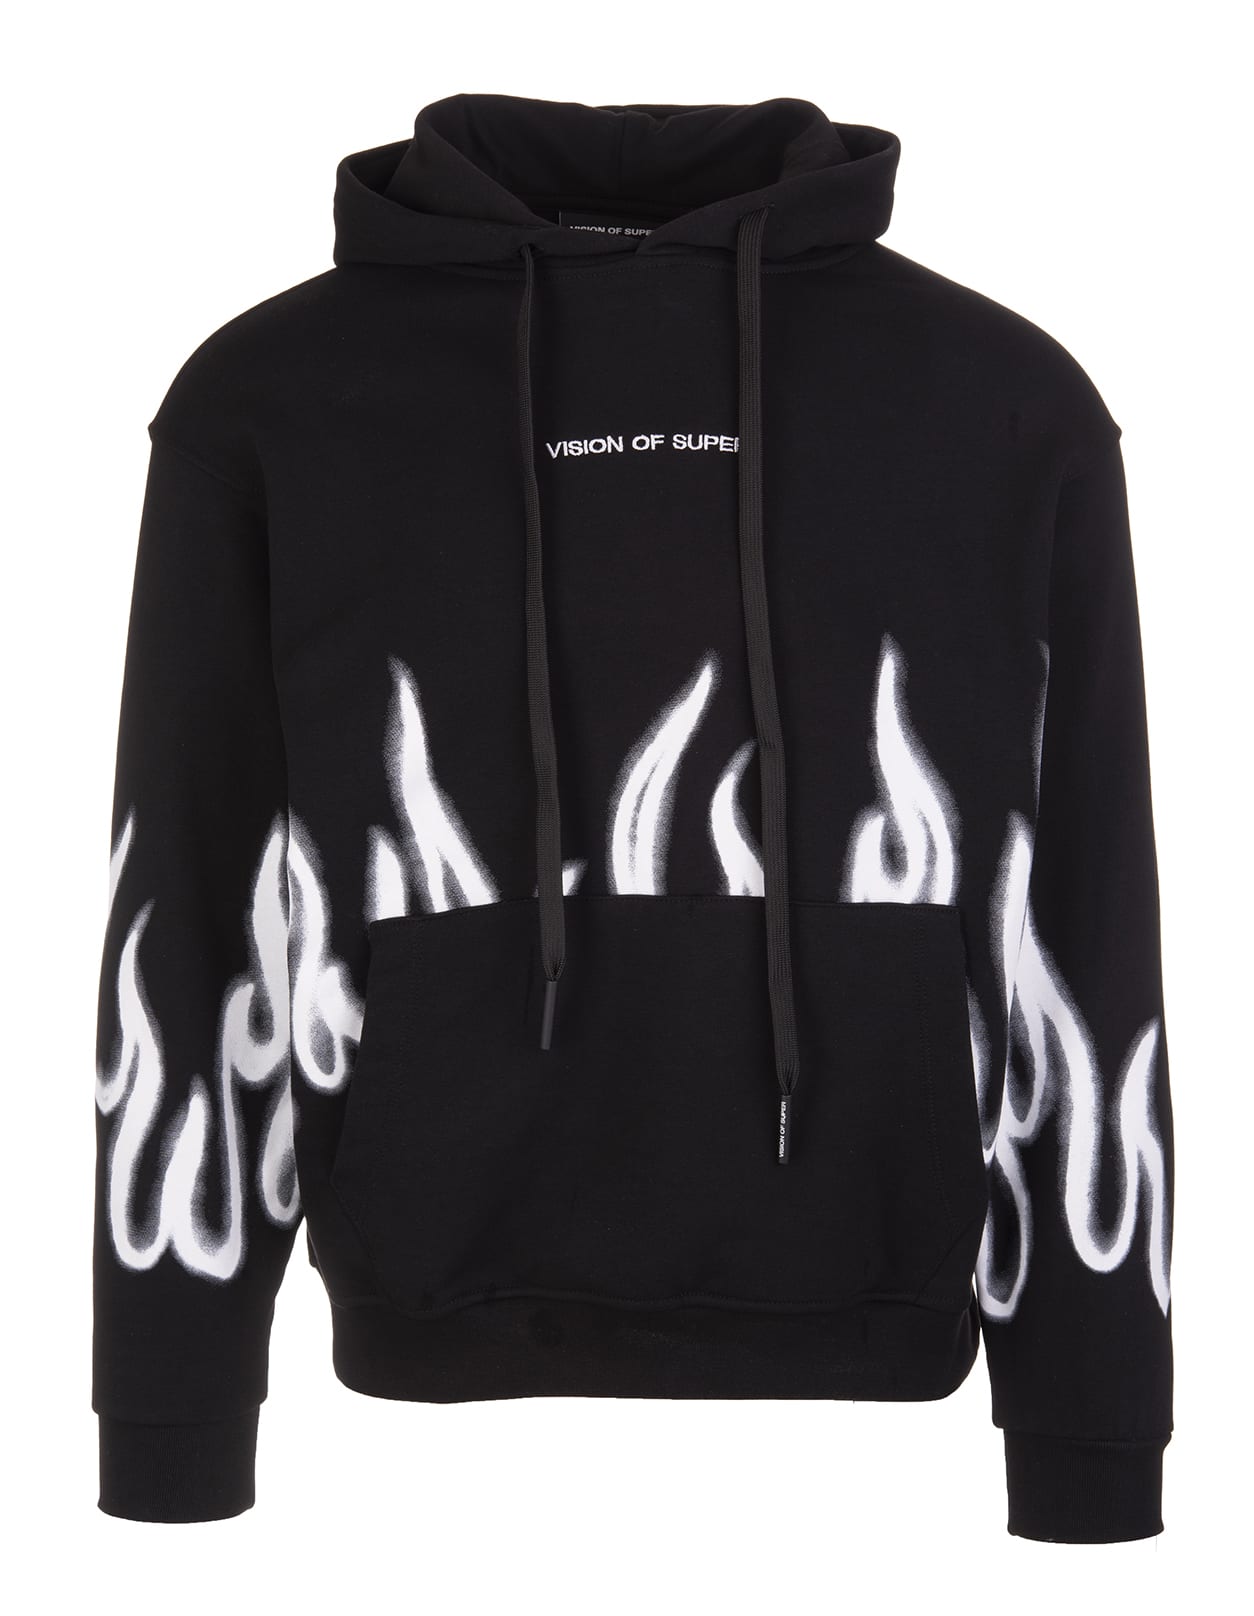 Vision of Super Unisex Black Hoodie With White Spray Flames Print